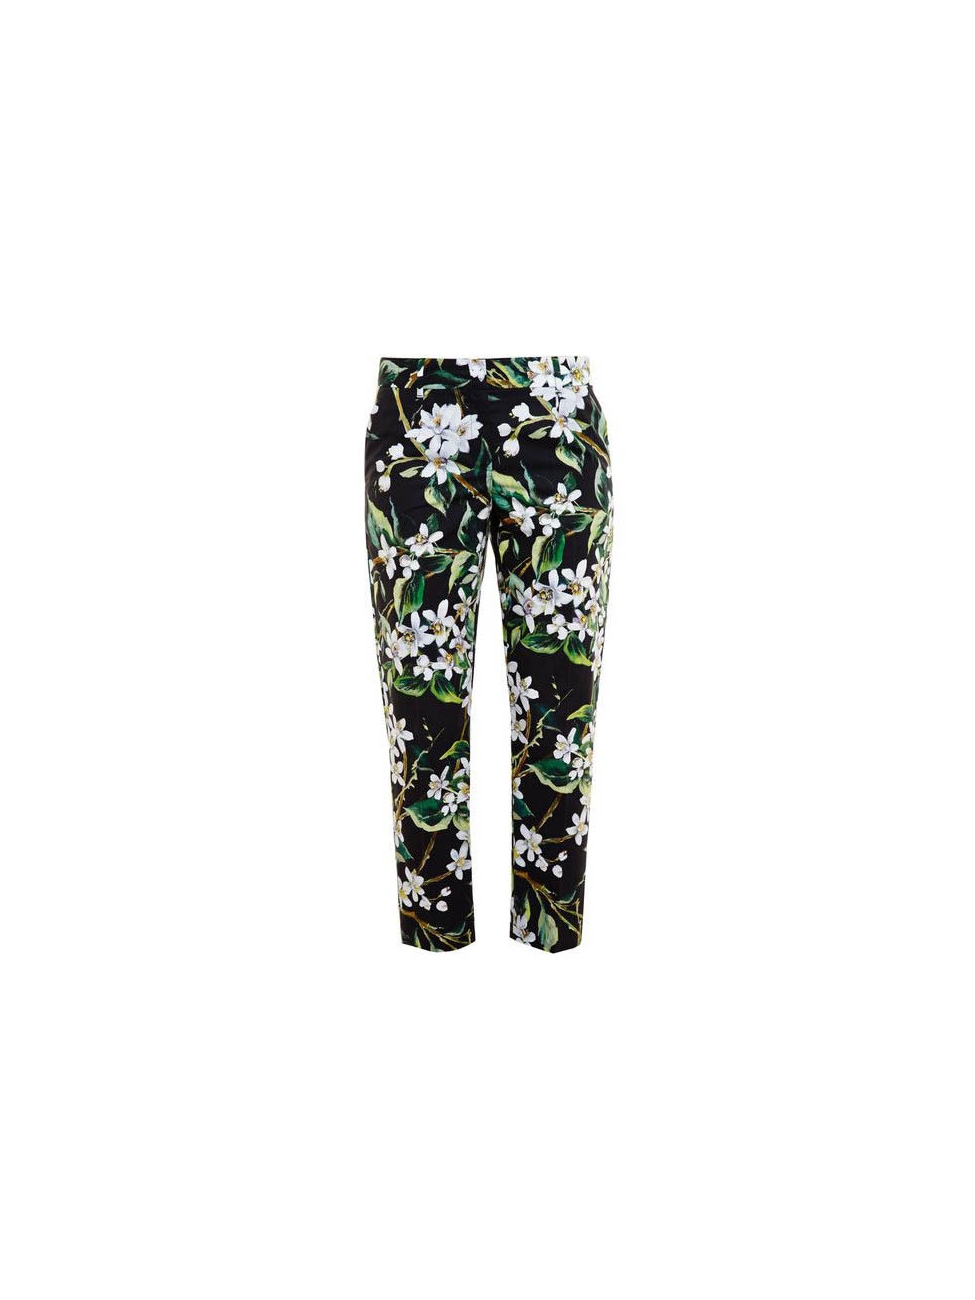 Boutique DOLCE & GABBANA Slim fit black green and white floral print pants  Retail price $675 Size 36